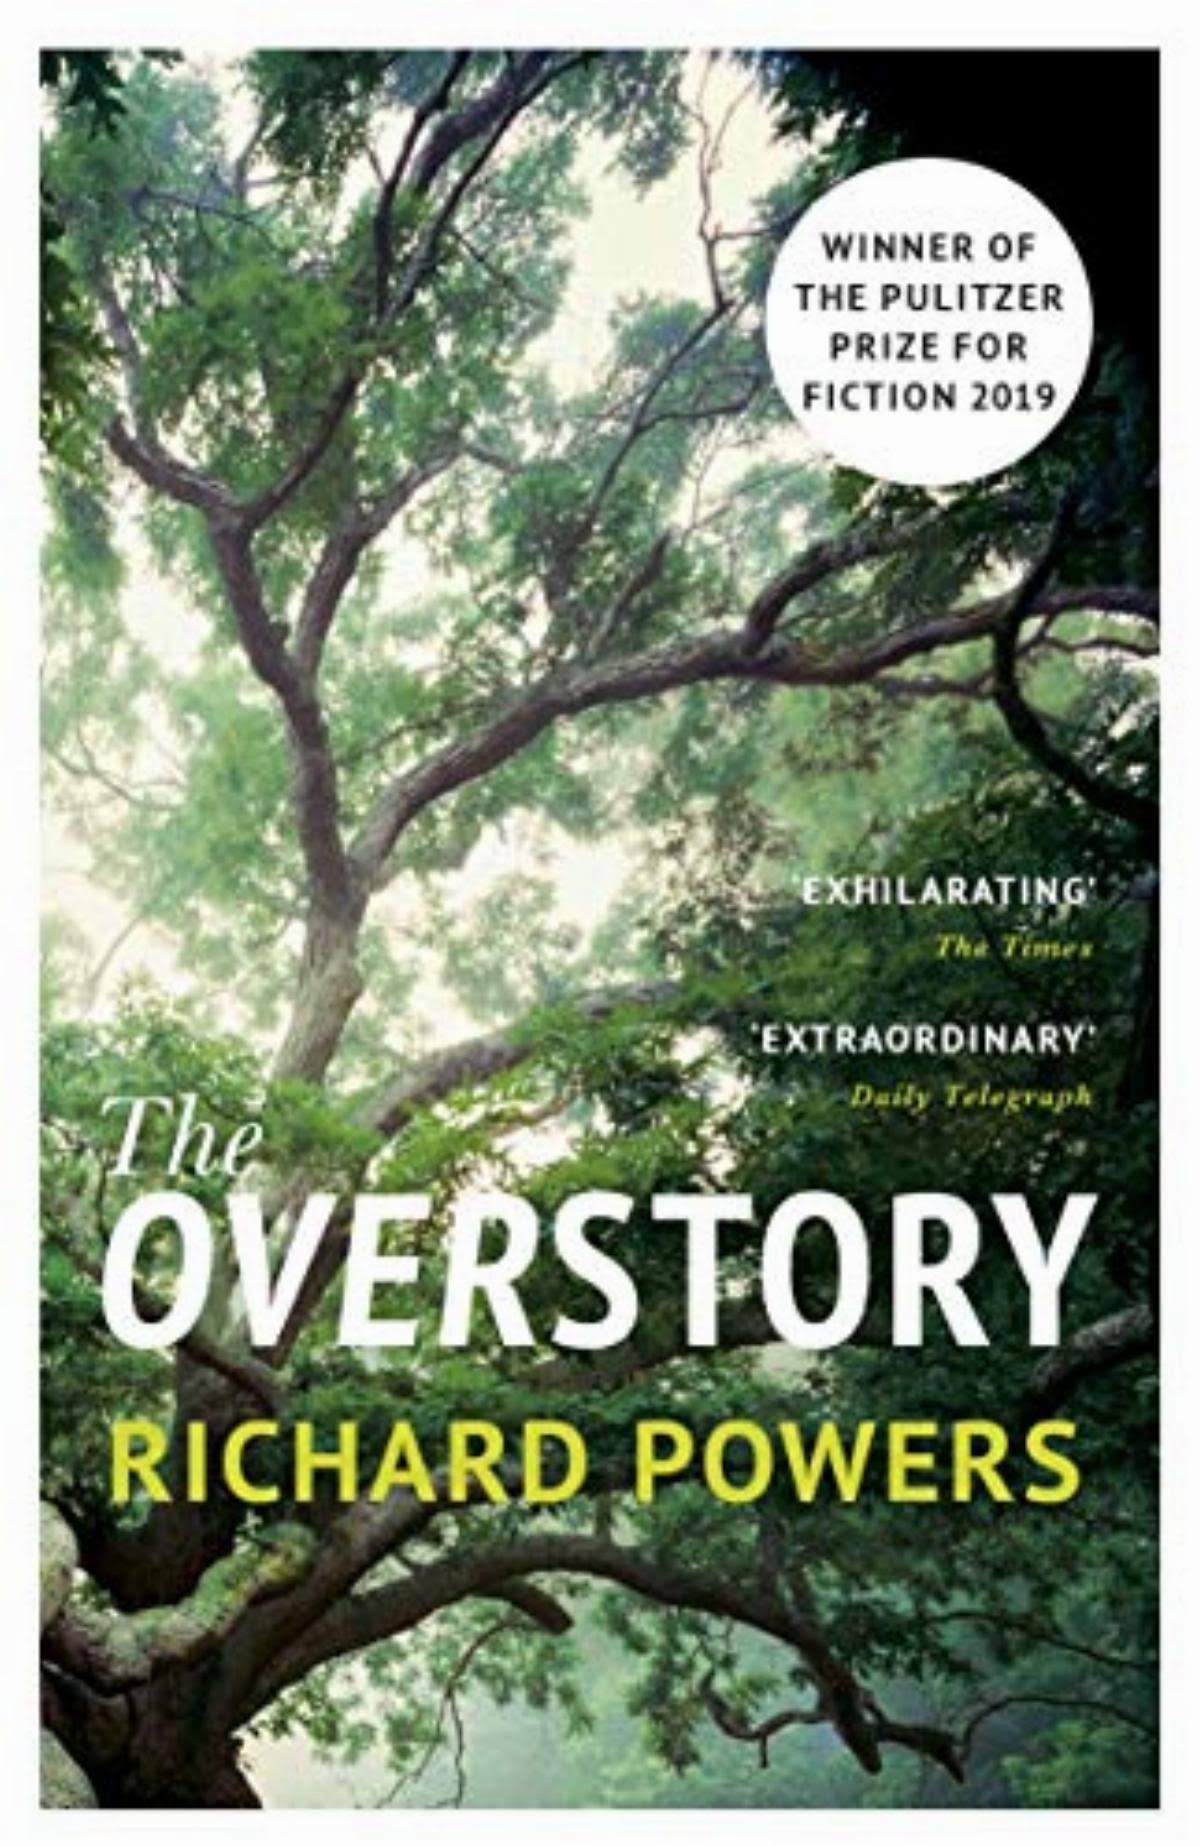 The Overstory: Shortlisted for the Man Booker Prize 2018 - Richard Powers